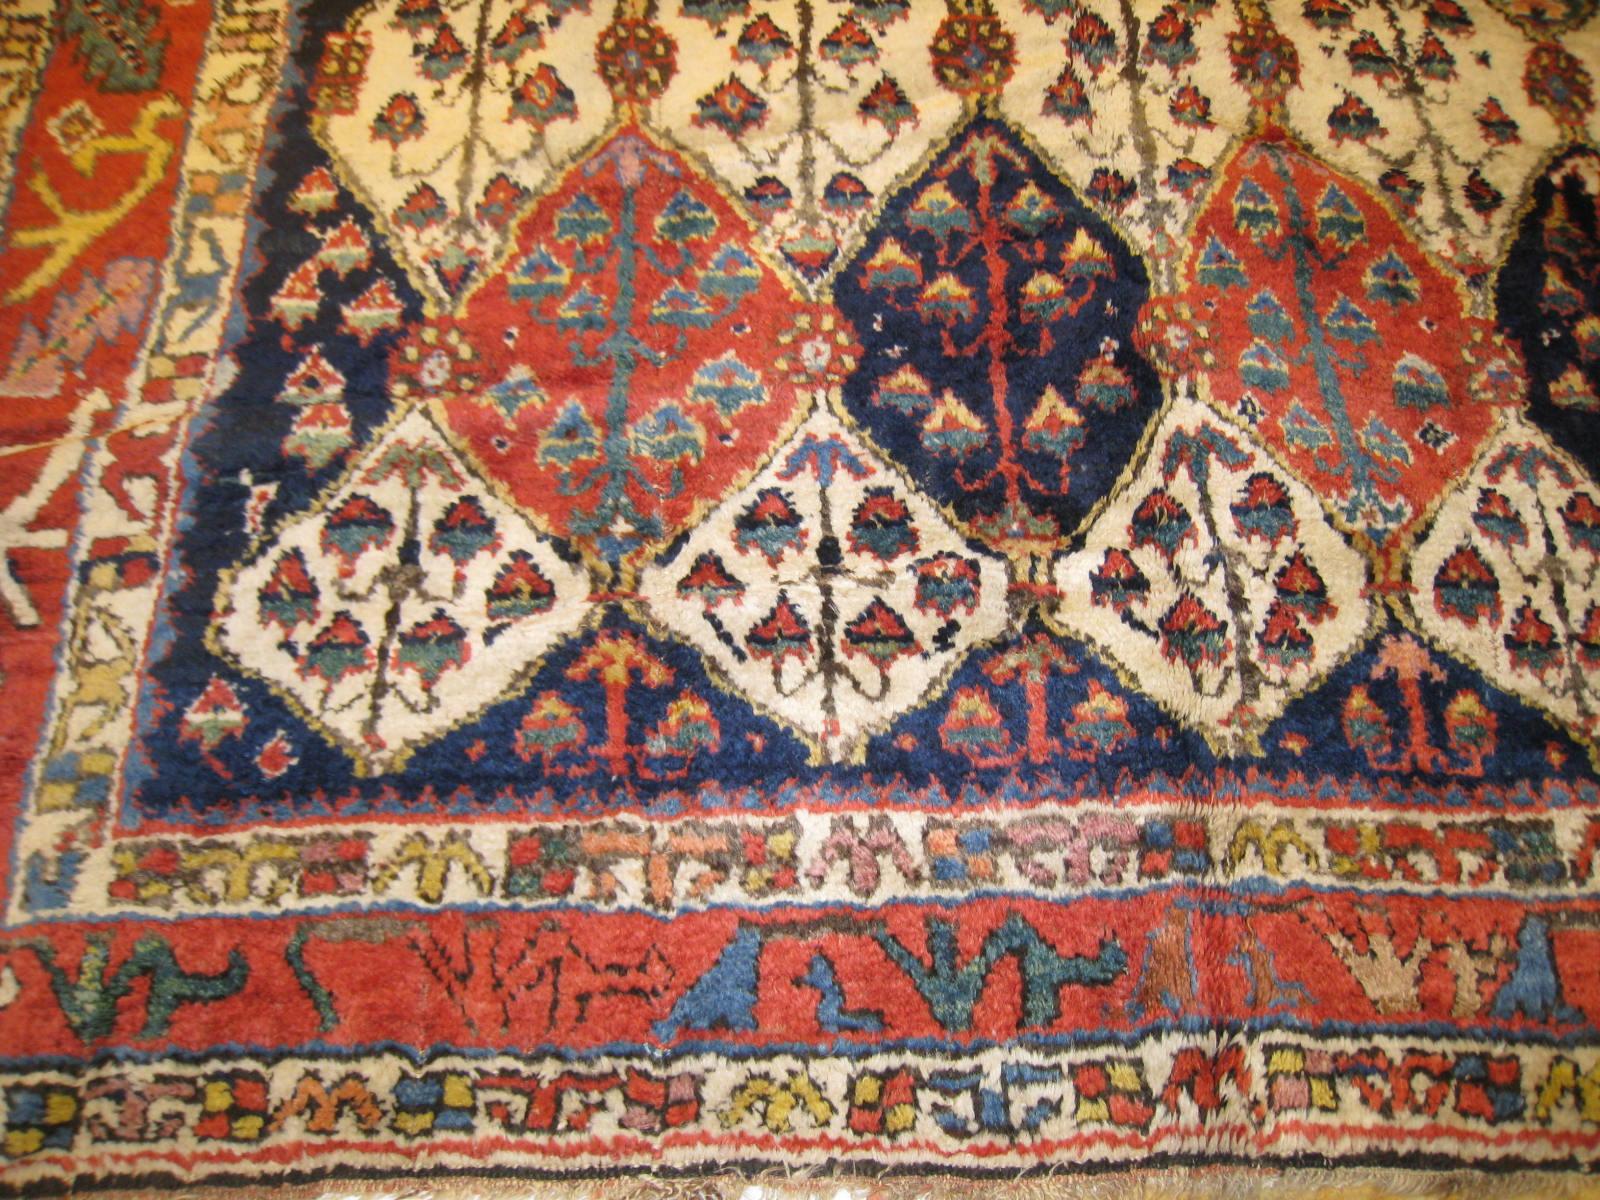 A mid-19th century Senna-Kurd Gallery carpet from northwest Persia in excellent overall condition, measures 13' 9